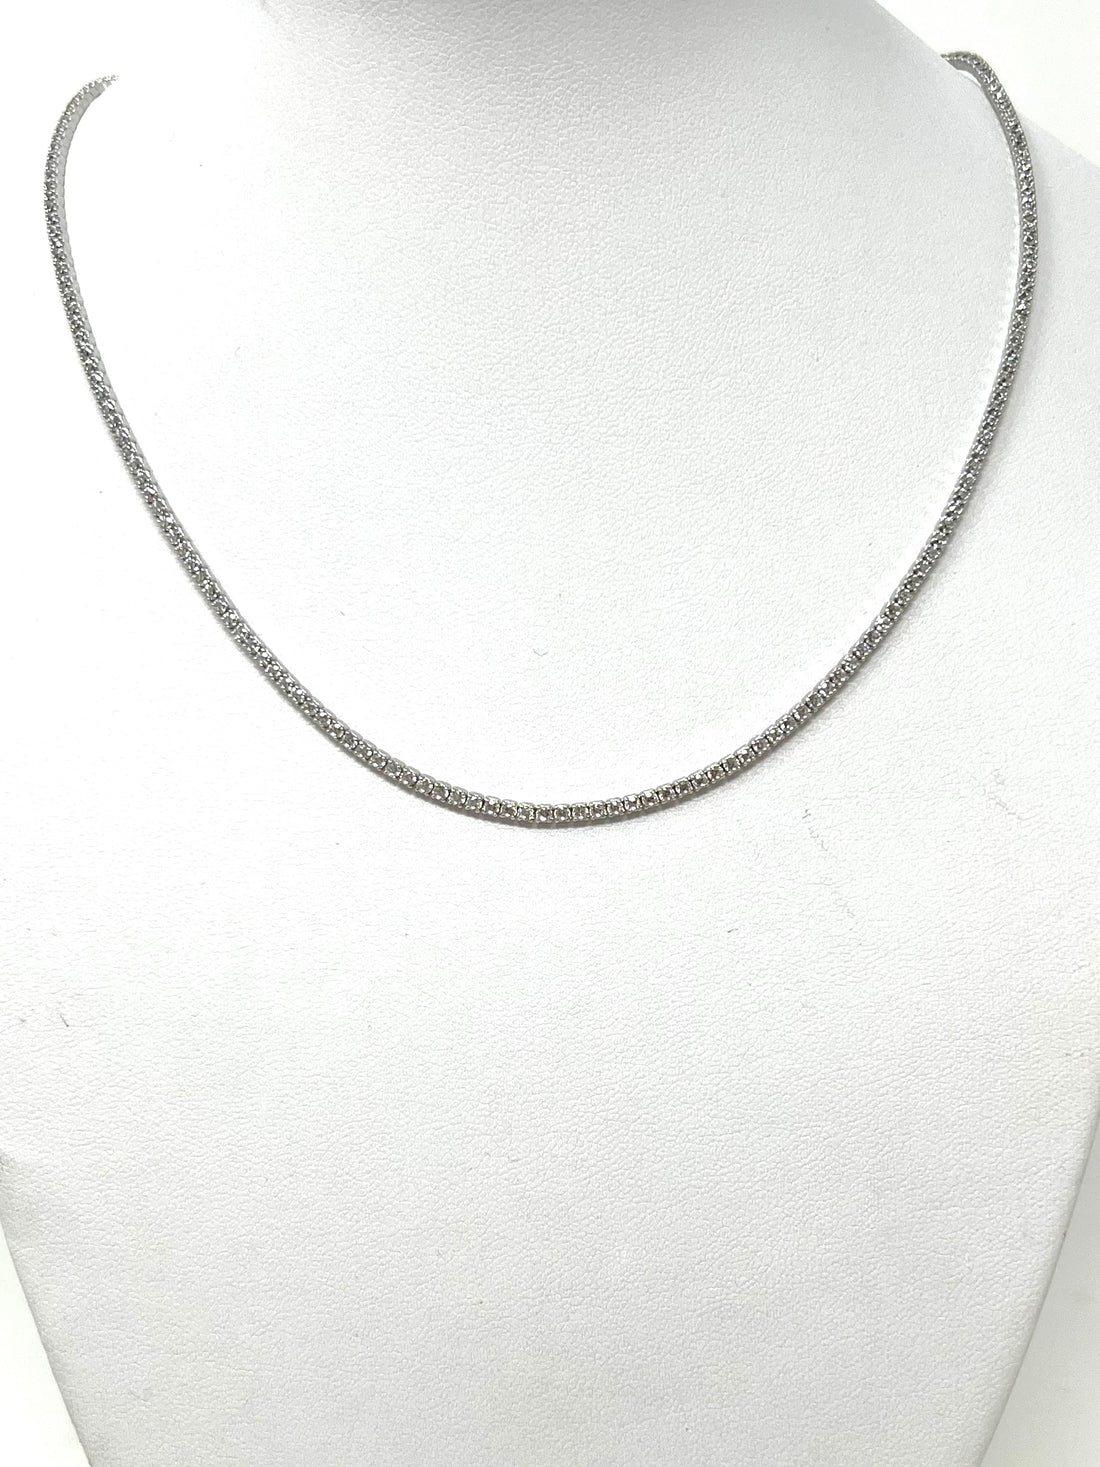 April Tennis Necklace in Silver with Clear Stones